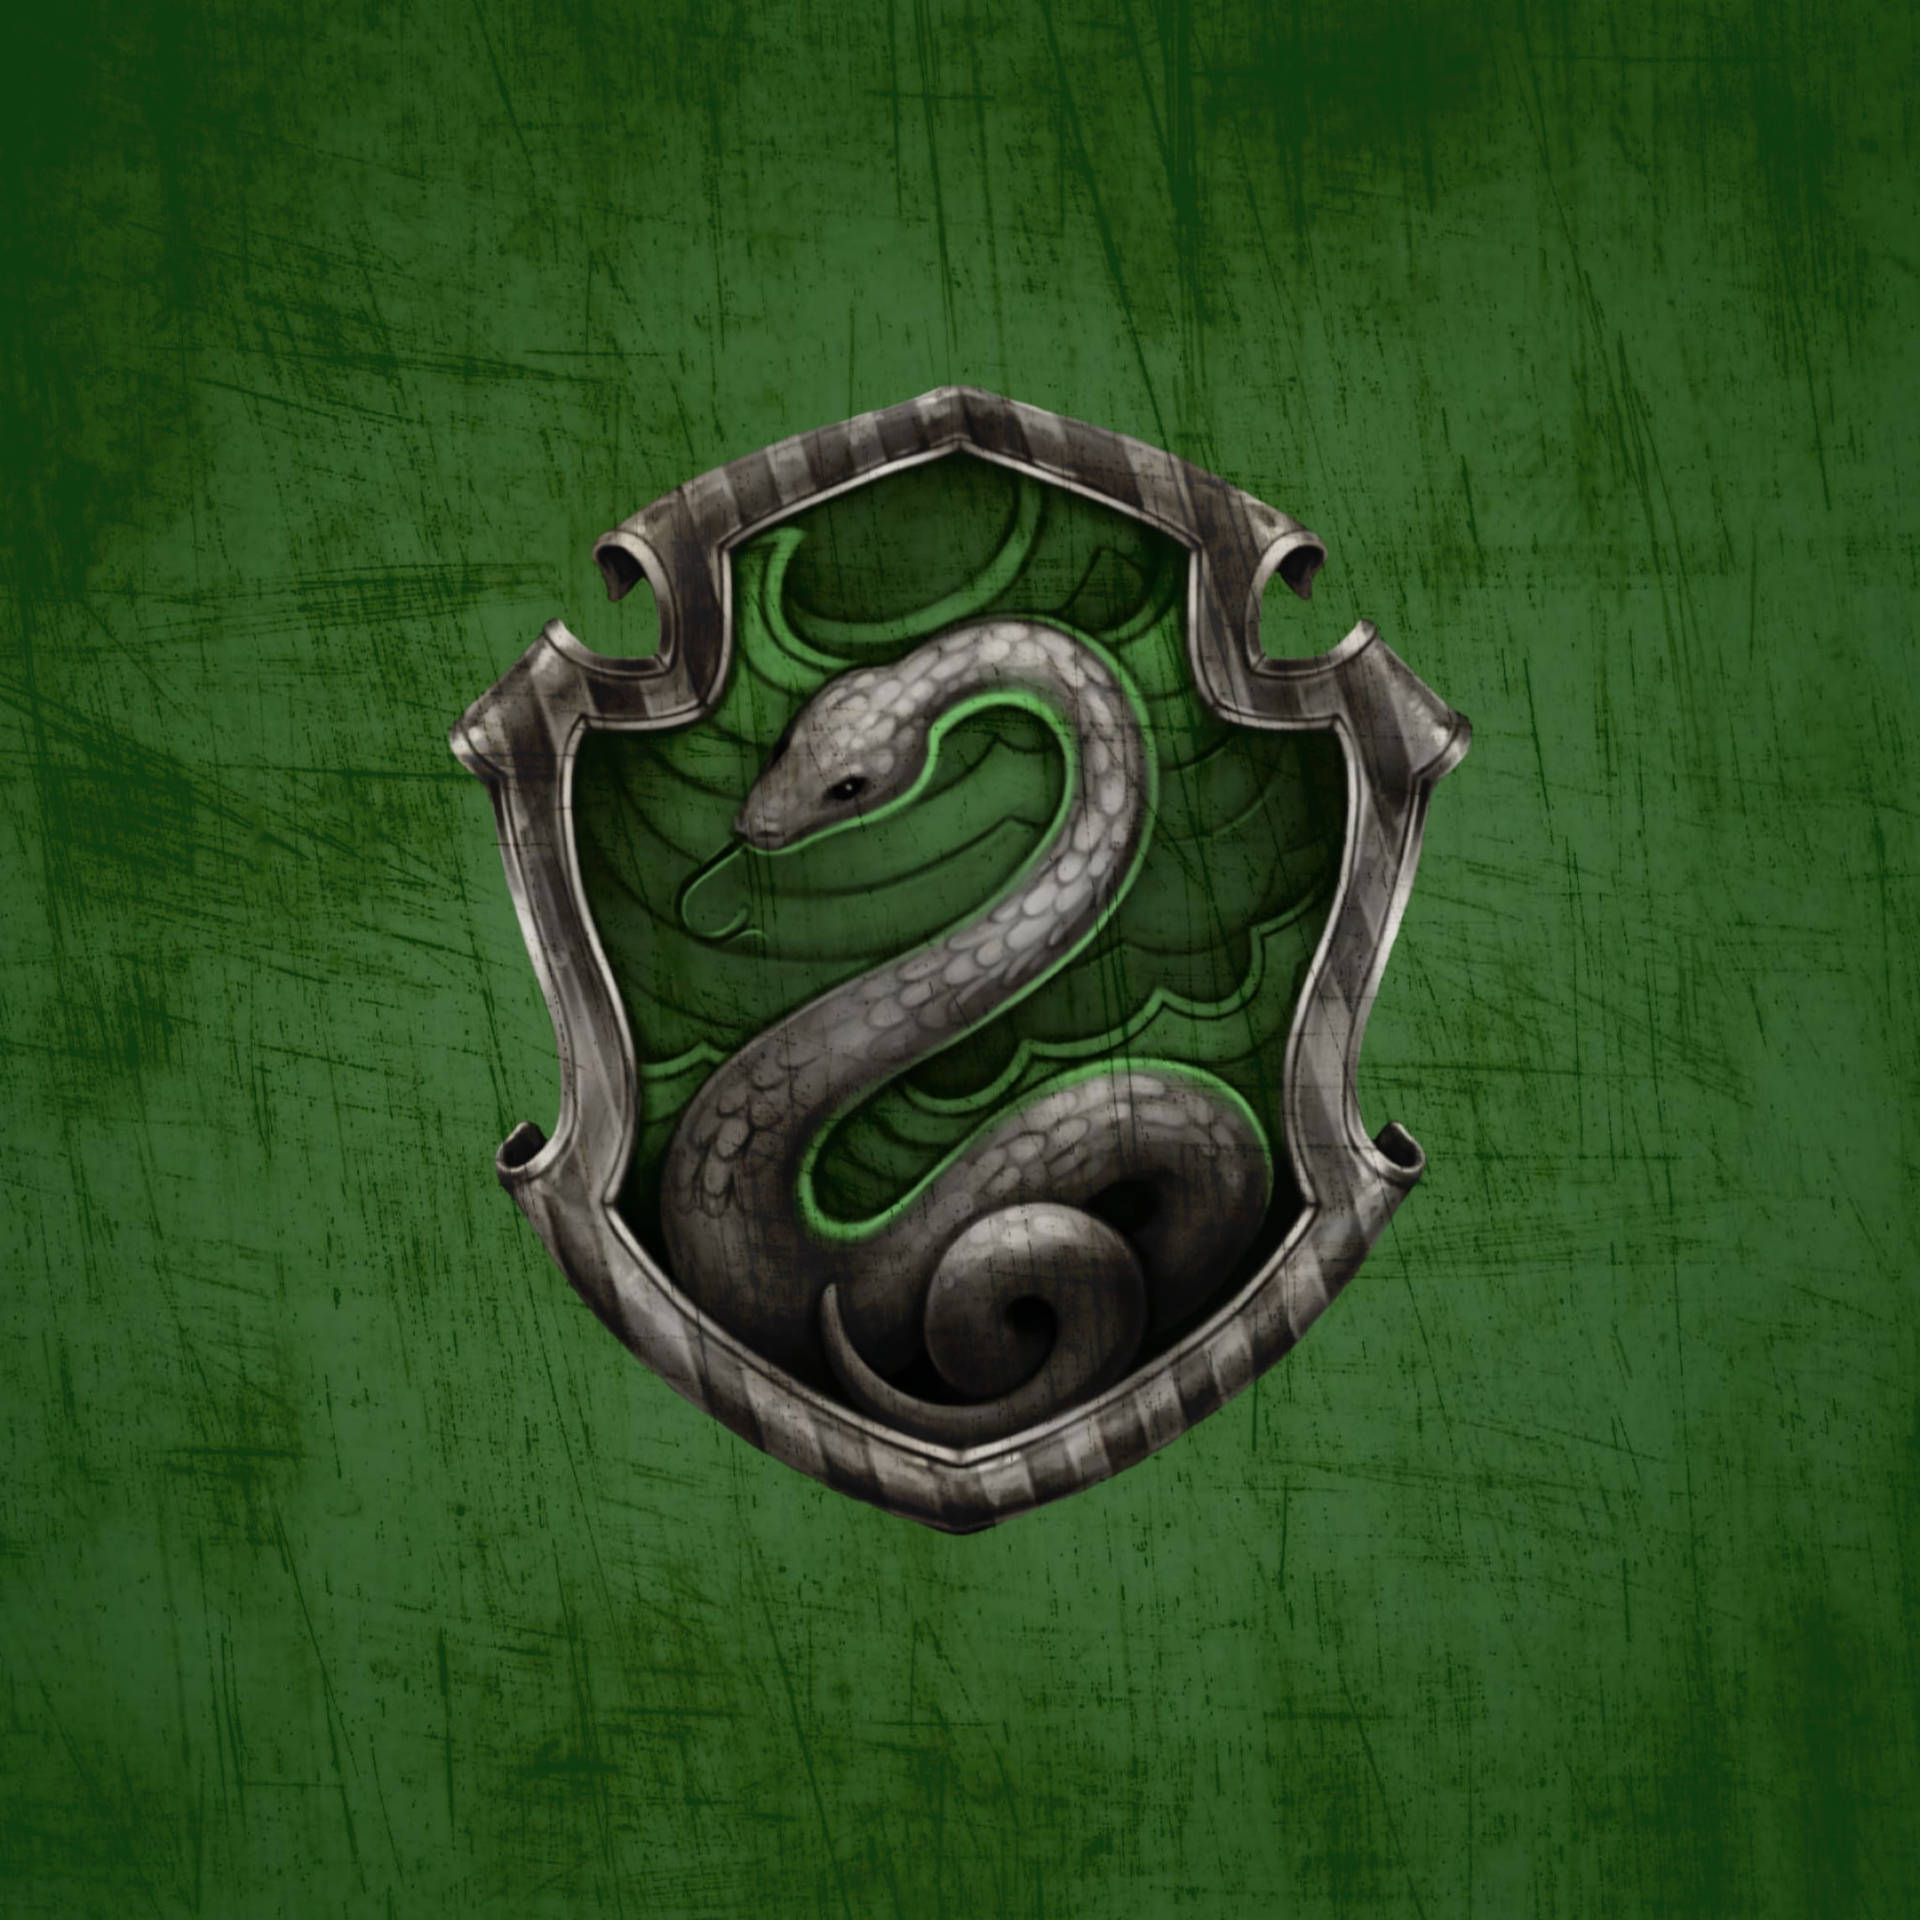 Slytherin 2289X2289 Wallpaper and Background Image